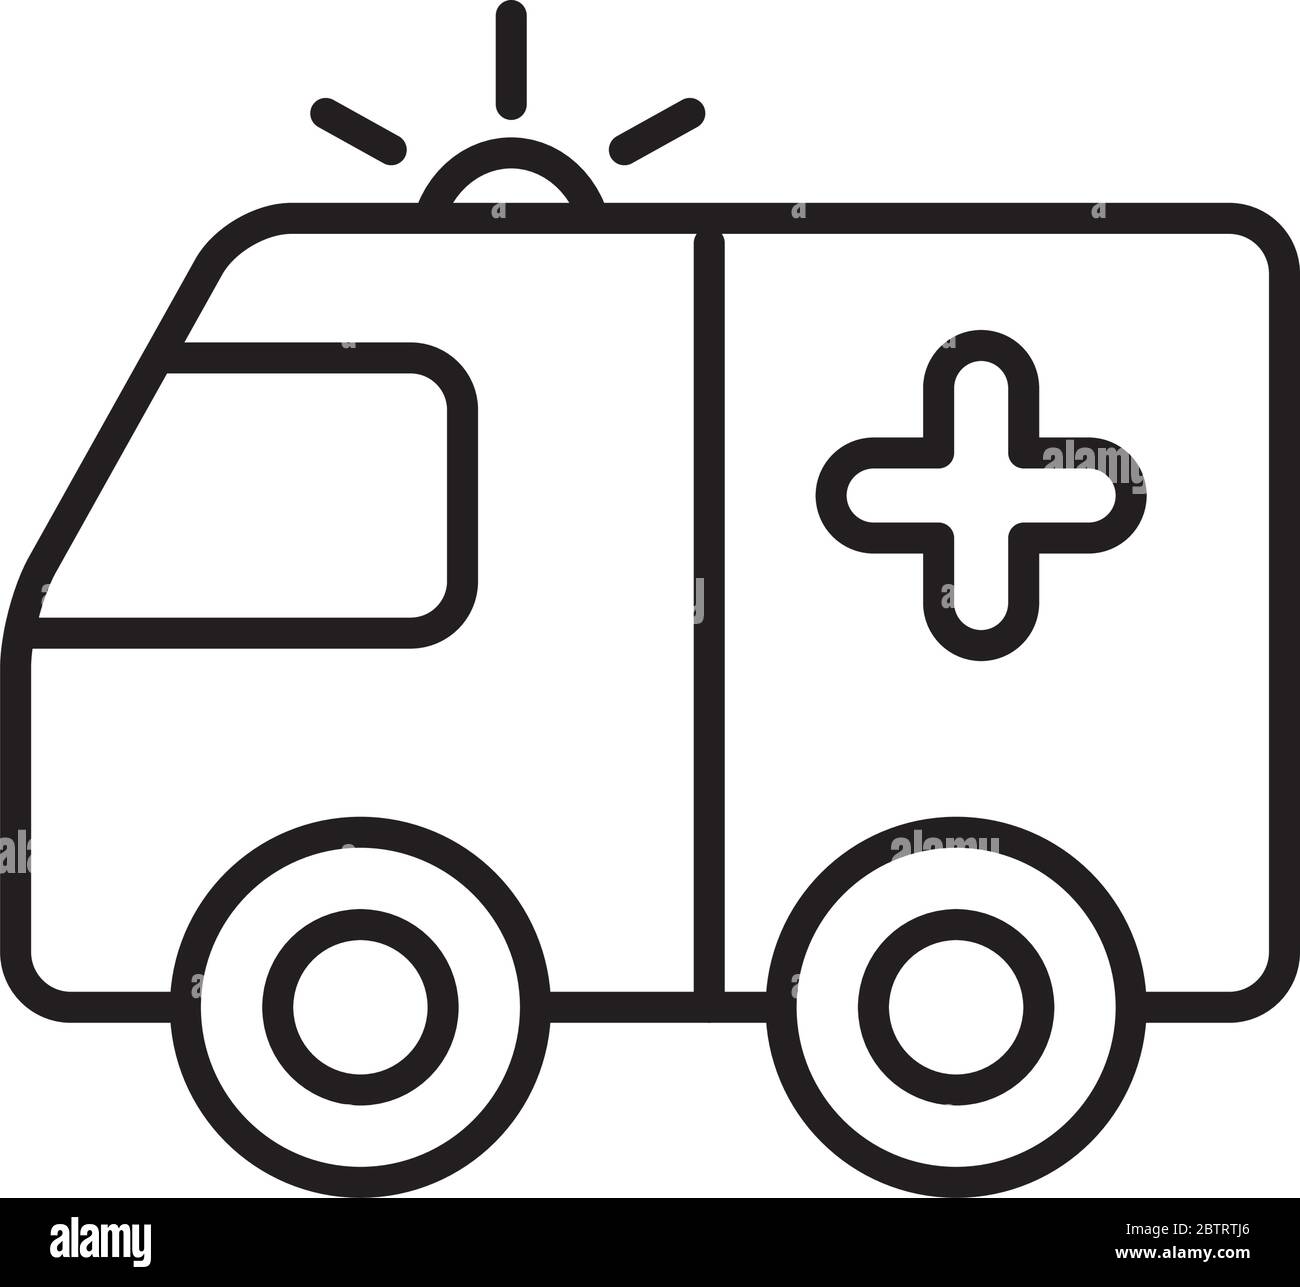 ambulance vehicle icon over white background, line style, vector illustration Stock Vector